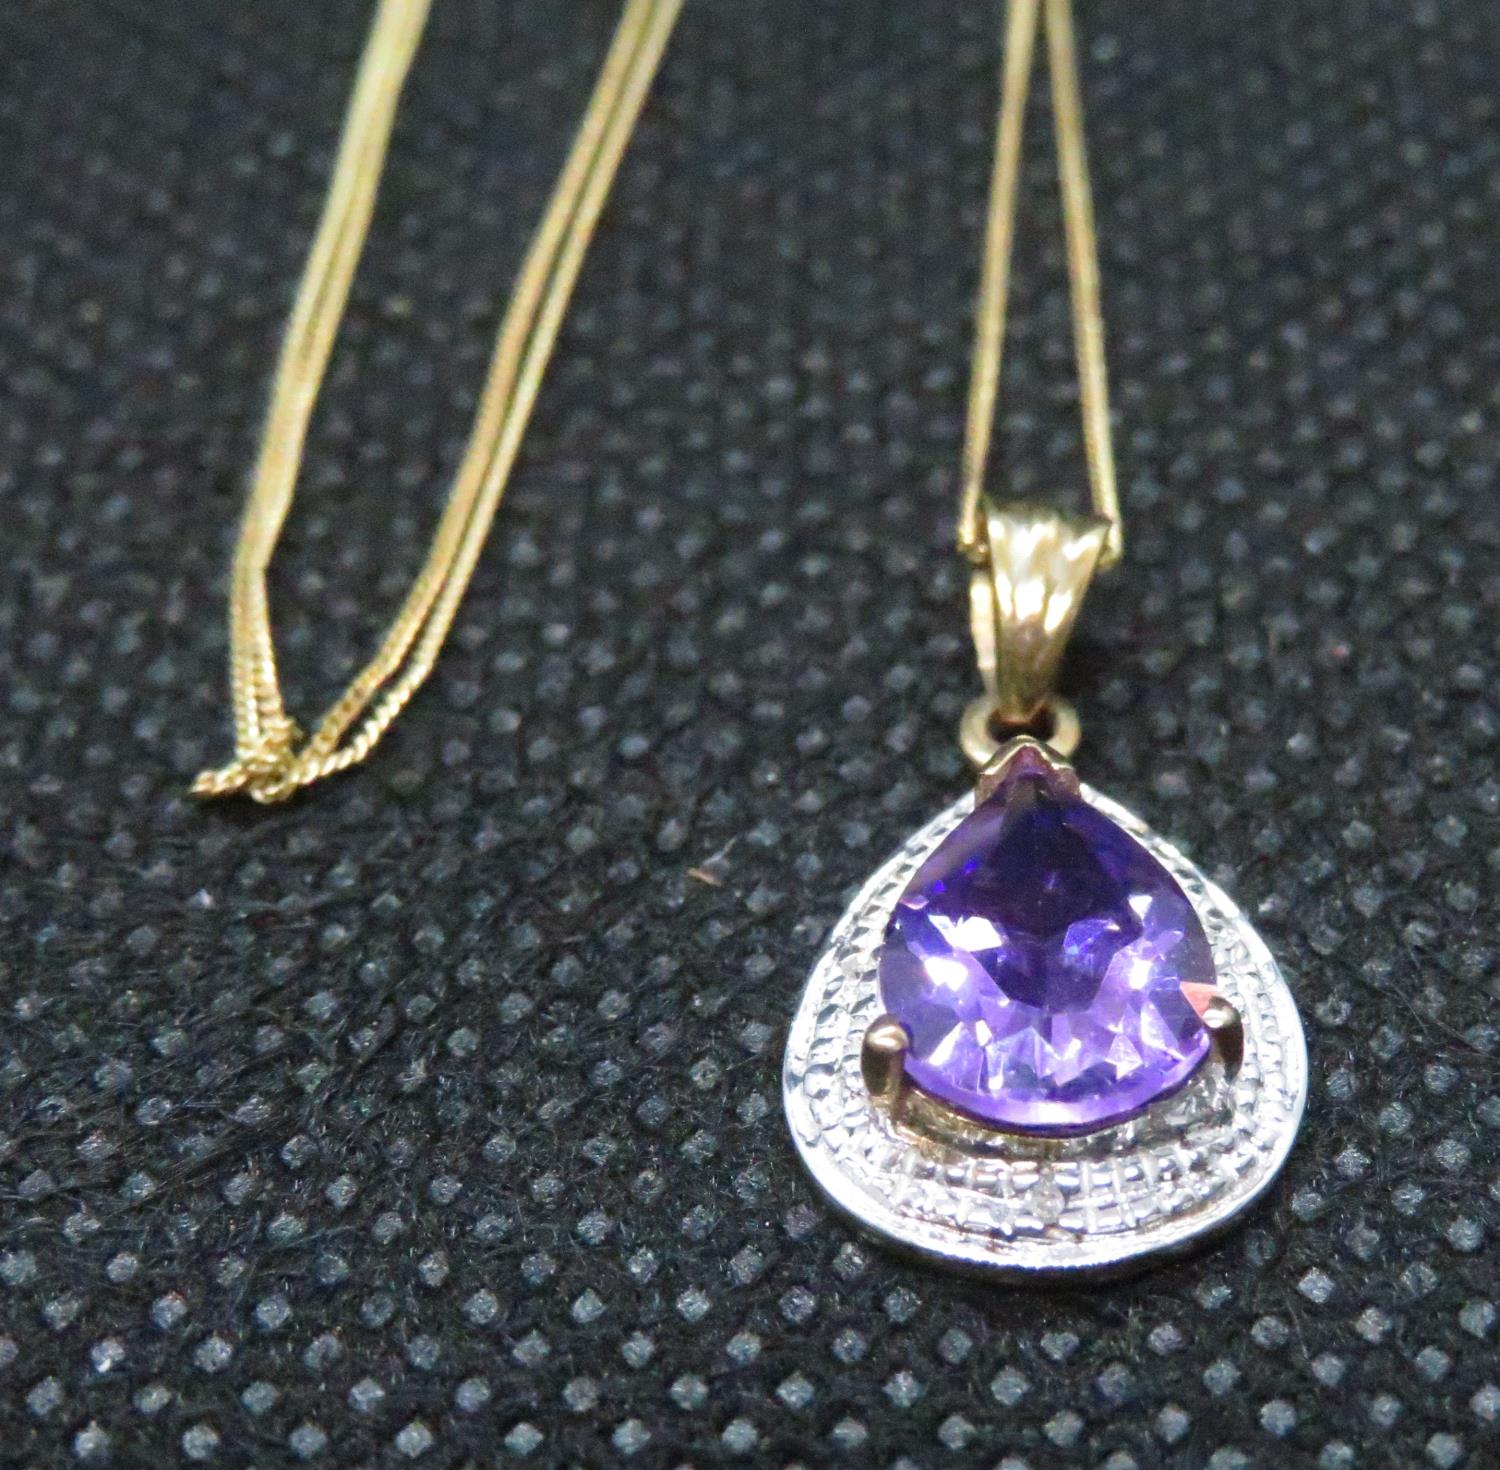 9ct amethyst pendant with gold chain - Image 2 of 2